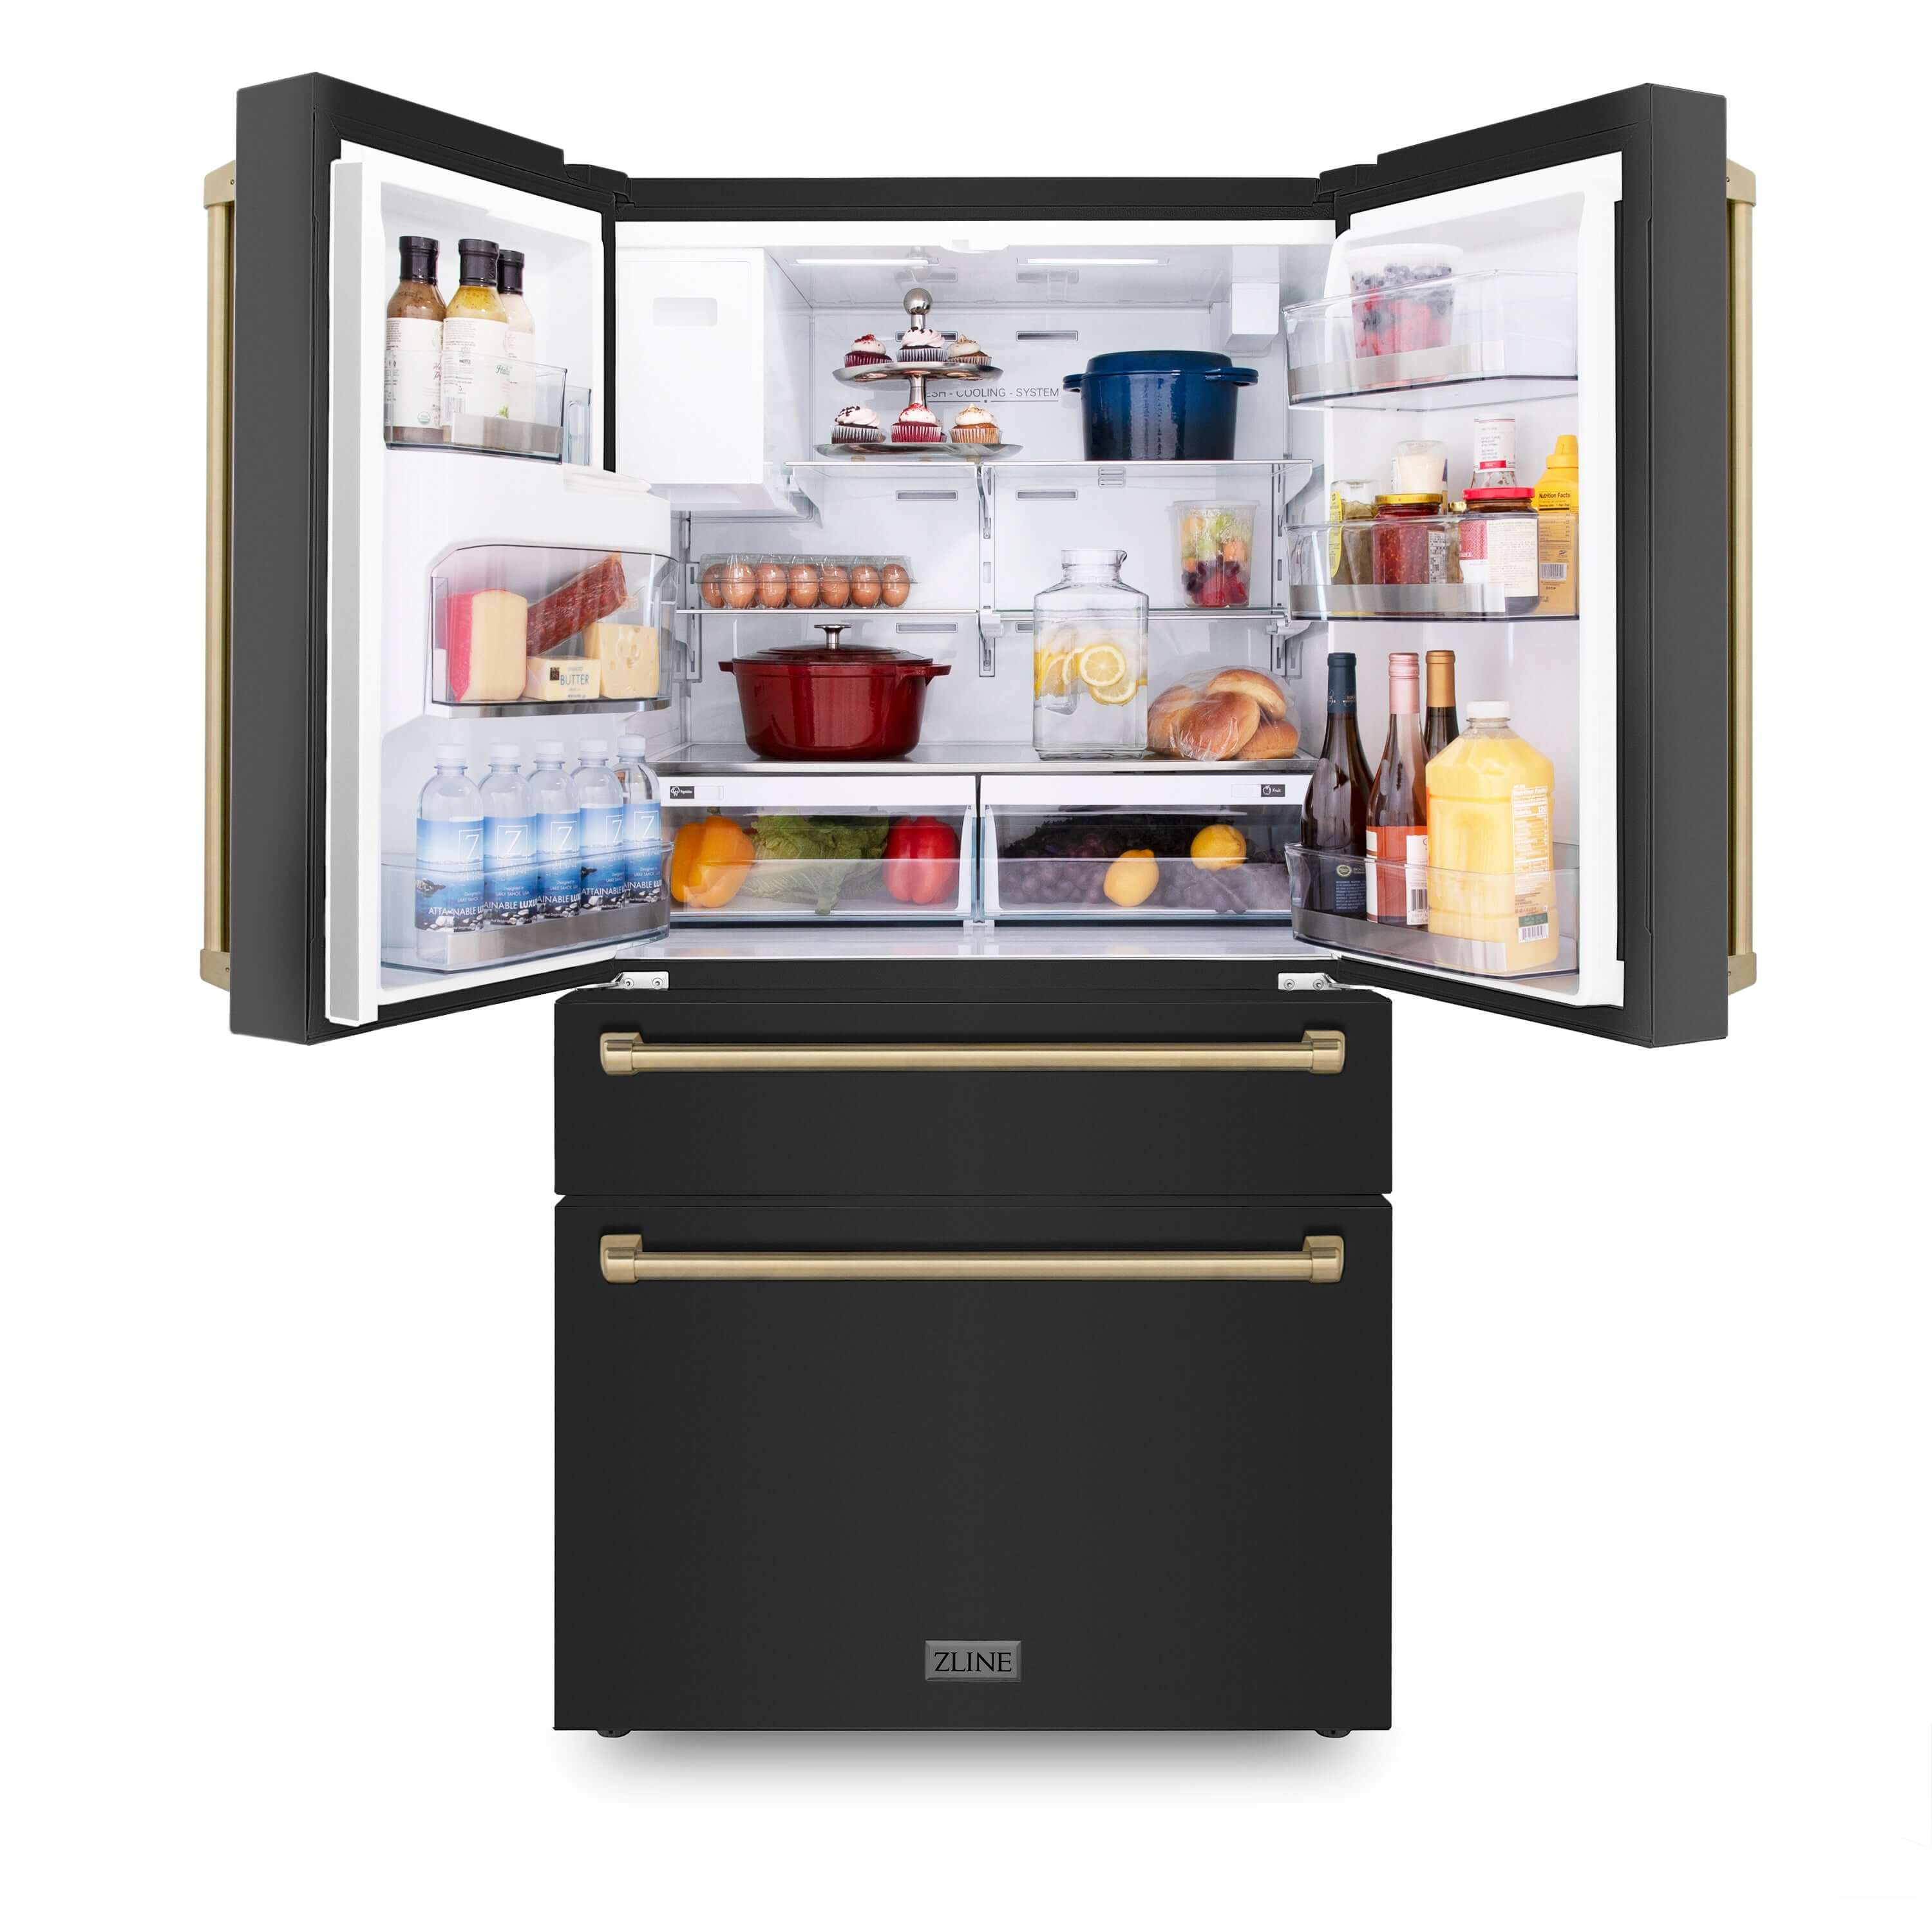 ZLINE 36 in. Autograph Edition 21.6 cu. ft Freestanding French Door Refrigerator with Water and Ice Dispenser in Fingerprint Resistant Black Stainless Steel with Champagne Bronze Accents (RFMZ-W-36-BS-CB)